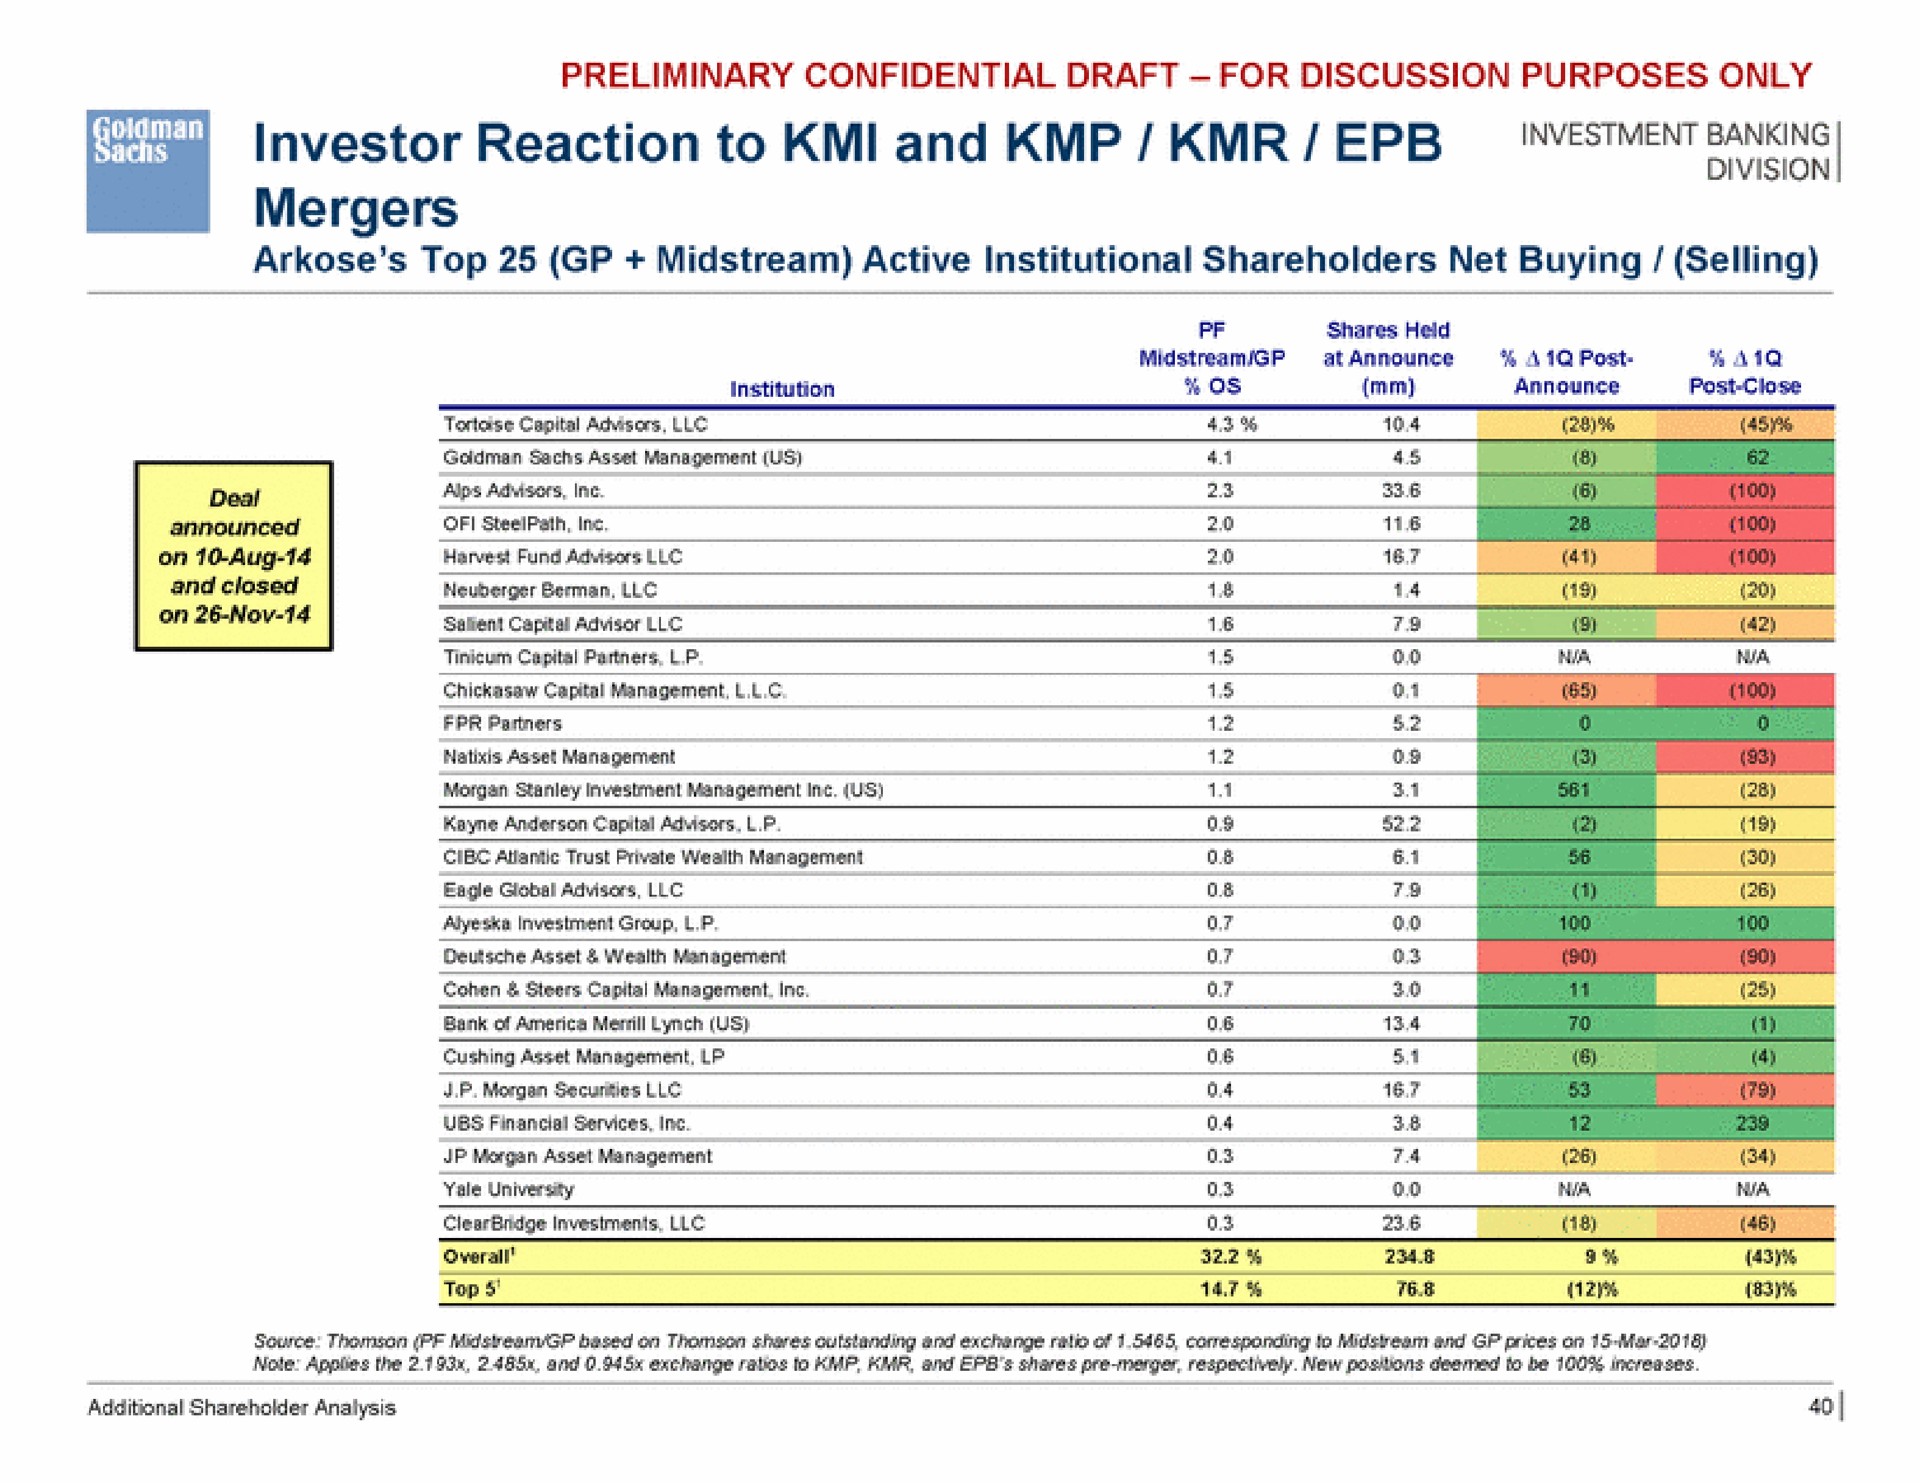 investor reaction to and vestment banking mergers | Goldman Sachs